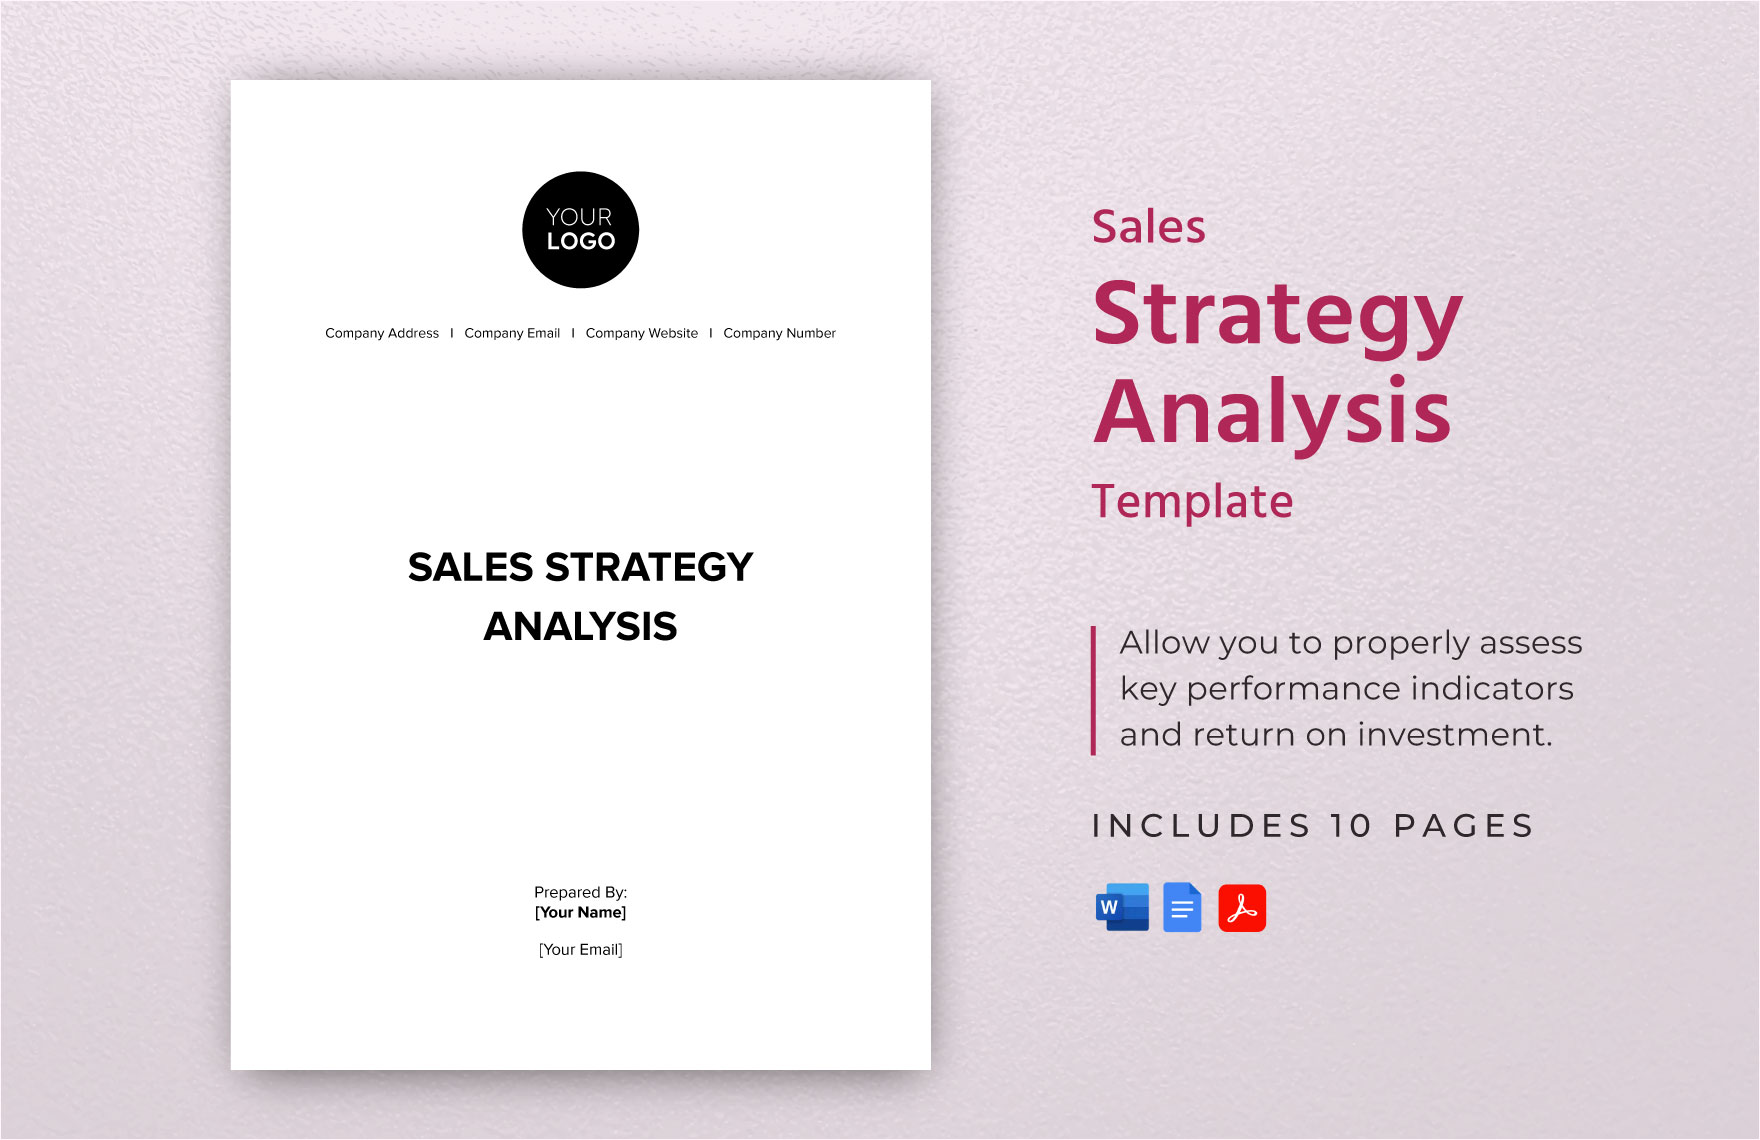 Sales Strategy Analysis Template in Word, Google Docs, PDF